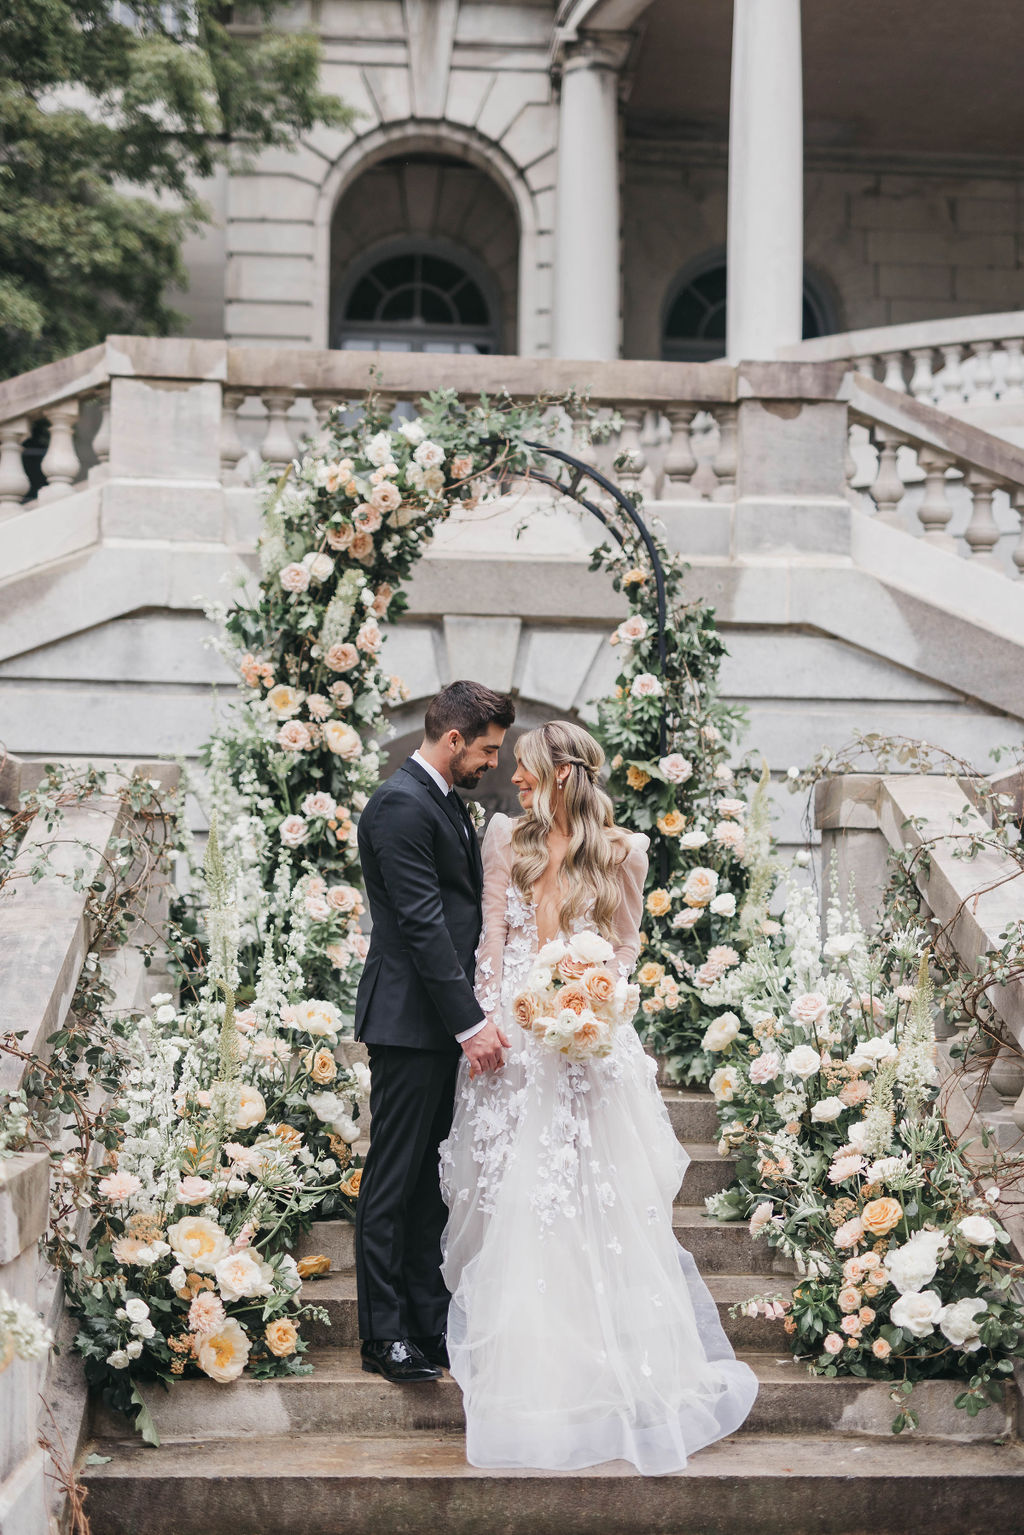 Elkins Estate outdoor wedding ceremony with floral arch backdrop | By luxury PA Wedding Photographer Lauren E. Bliss Photography